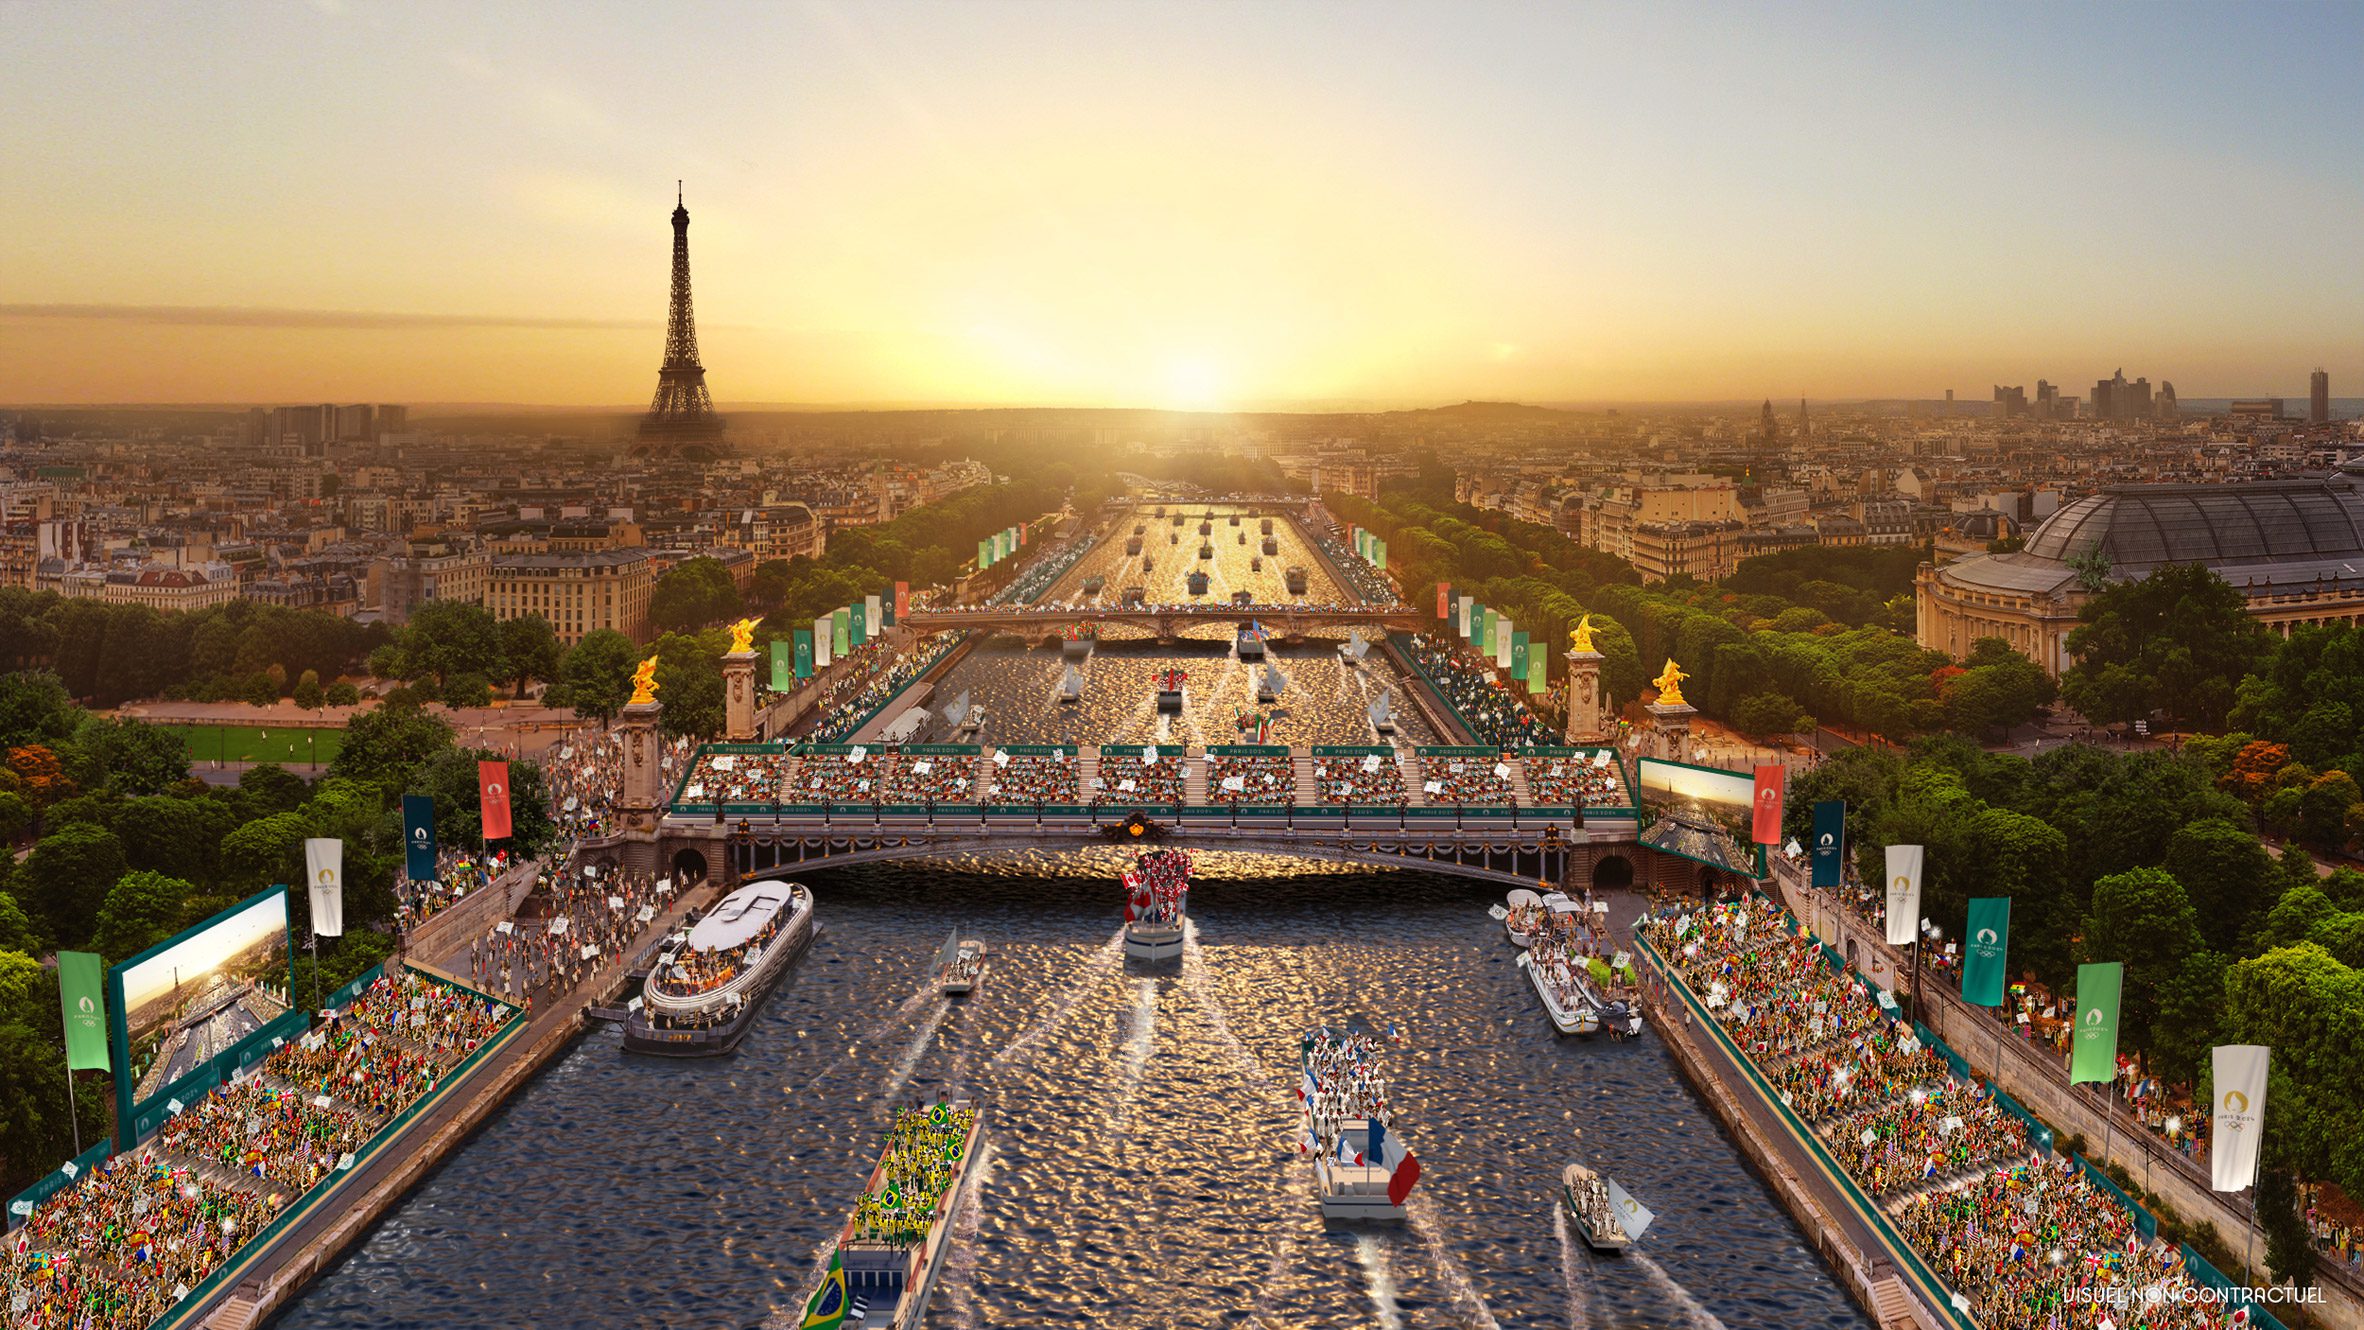 Visualisation of the Paris 2024 opening ceremony on the Seine